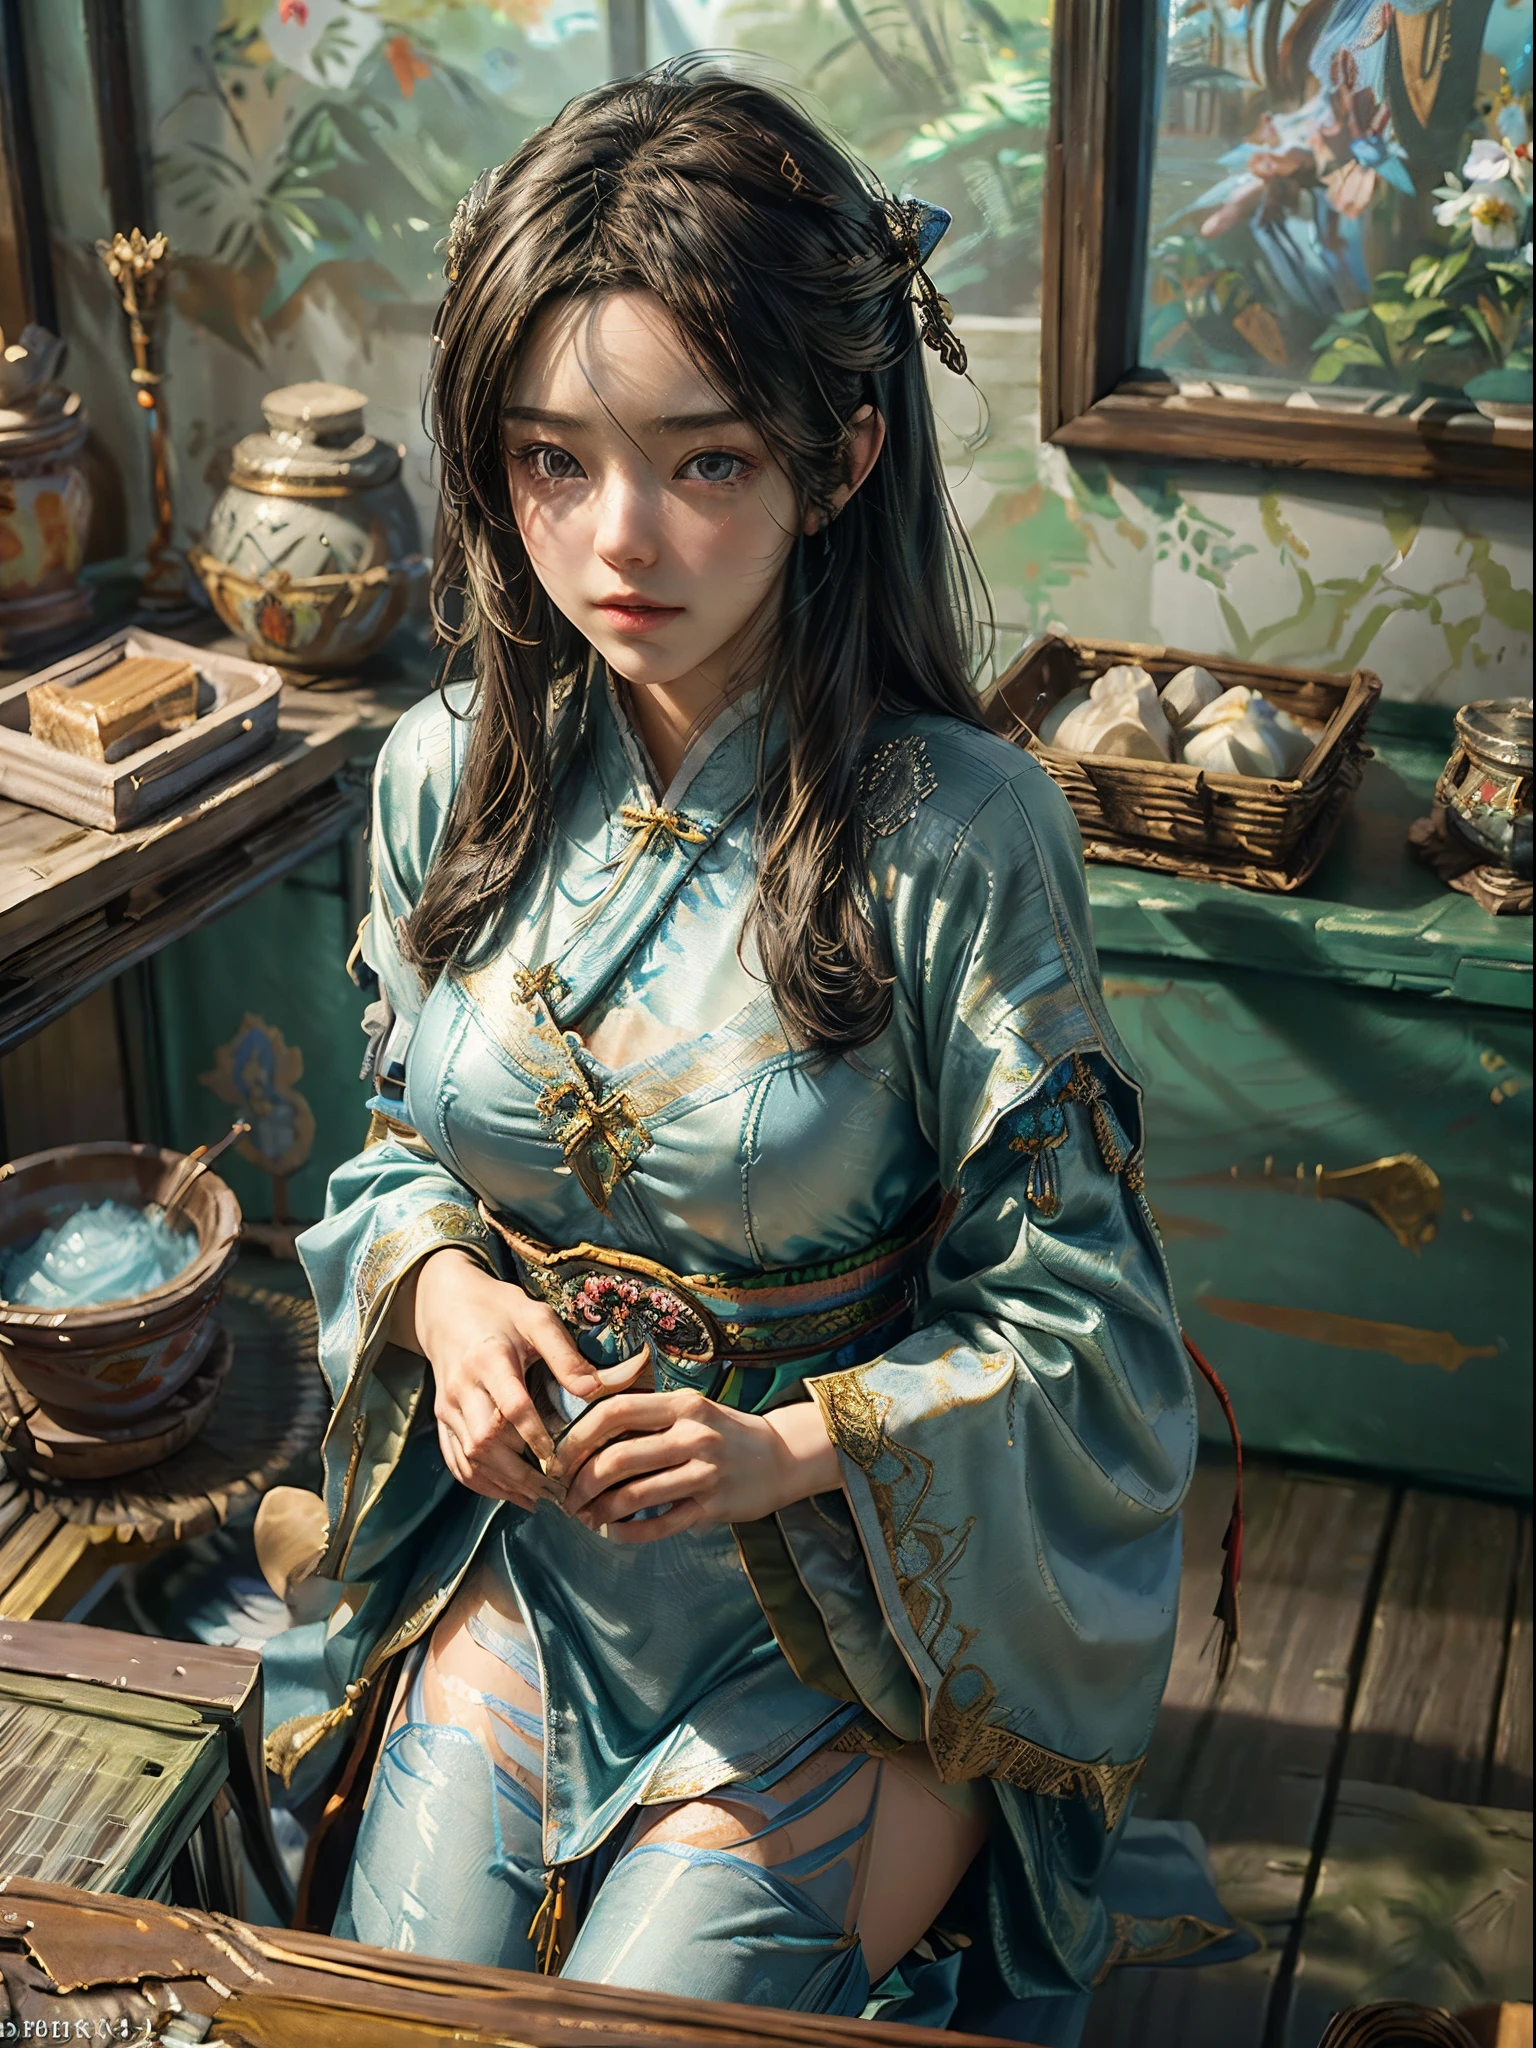 ((Best Quality)), ((Masterpiece)), (Detail: 1.4), 3D, A Beautiful japanese Female Figure, 16 years old, HDR (High Dynamic Range), Ancient Chinese Costumes, Satin, Ray Tracing, NVIDIA RTX, Super-Resolution, Unreal 5, Subsurface Scattering, PBR Textures, Post-processing, Anisotropic Filtering, Depth of Field, Maximum Sharpness and Clarity, Multi-layer Textures, Albedo and Highlight Maps, Surface Shading, Precise simulation of light-material interactions, perfect proportions, Octane Render, bi-color light, large aperture, low ISO, white balance, rule of thirds, 8K RAW, finger detailing, refined facial features, focus on the face